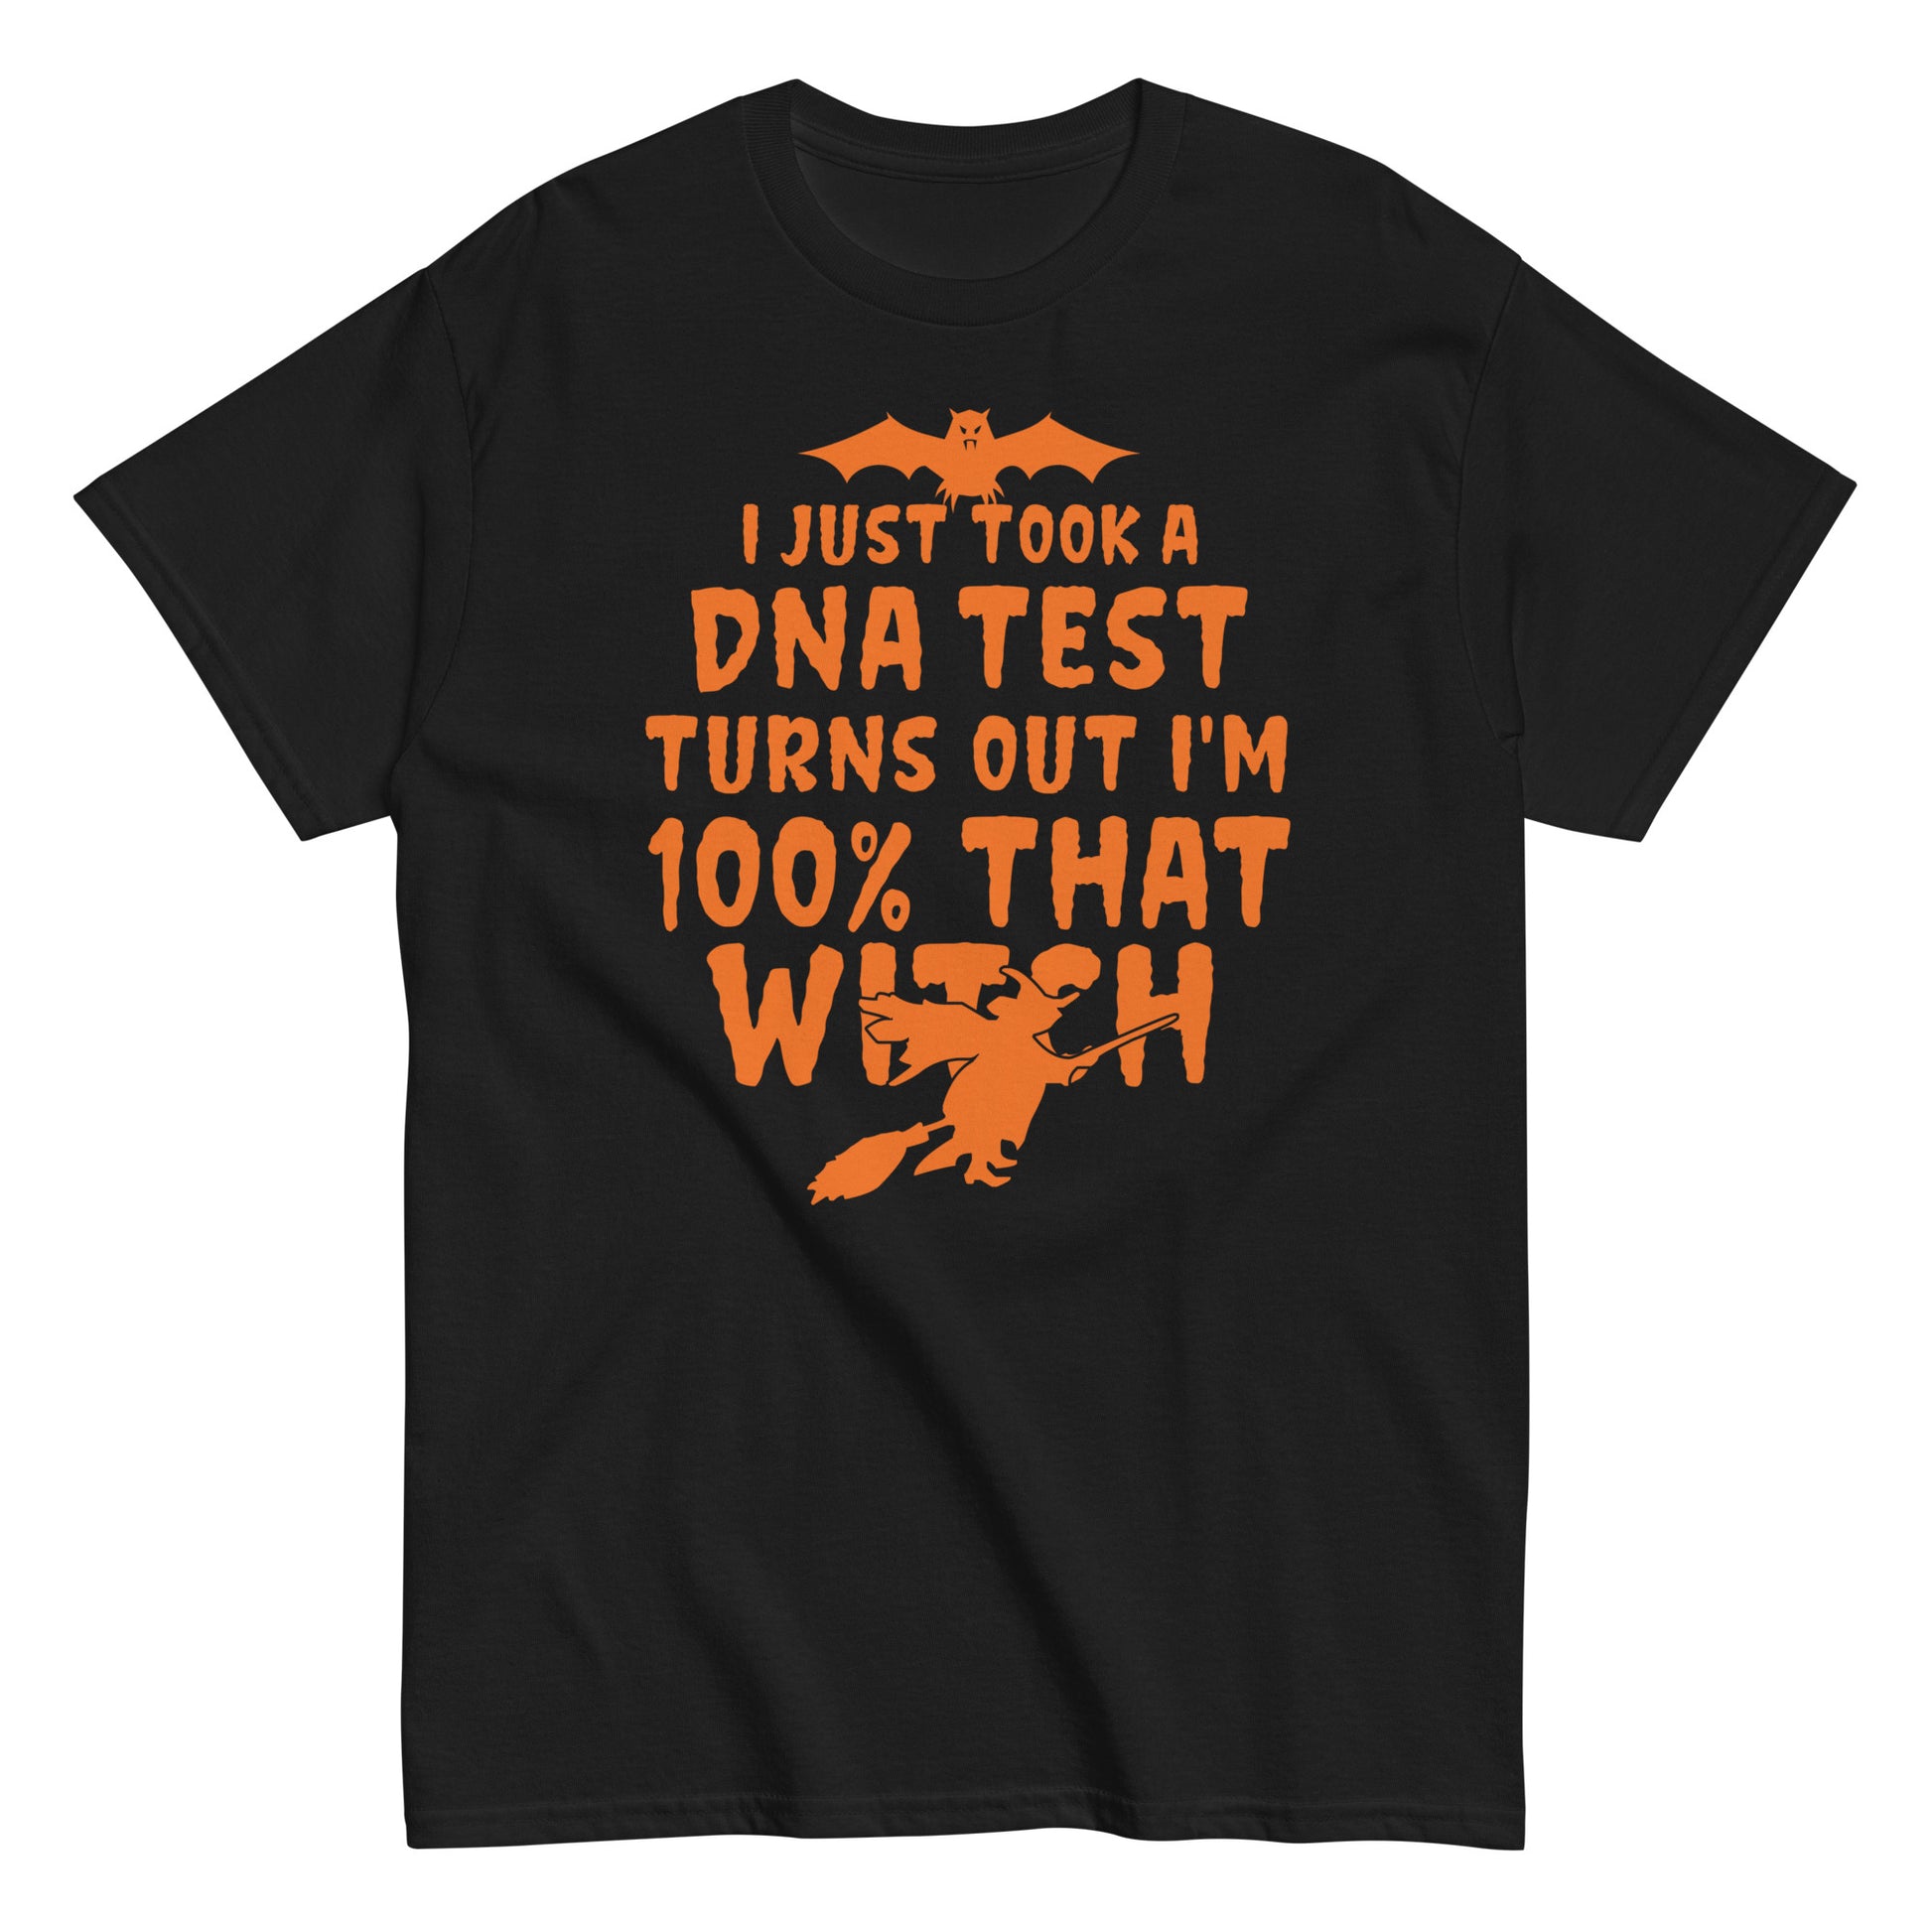 DNA Test Turns Out I'm 100% Witch, Halloween Soft Style Tee